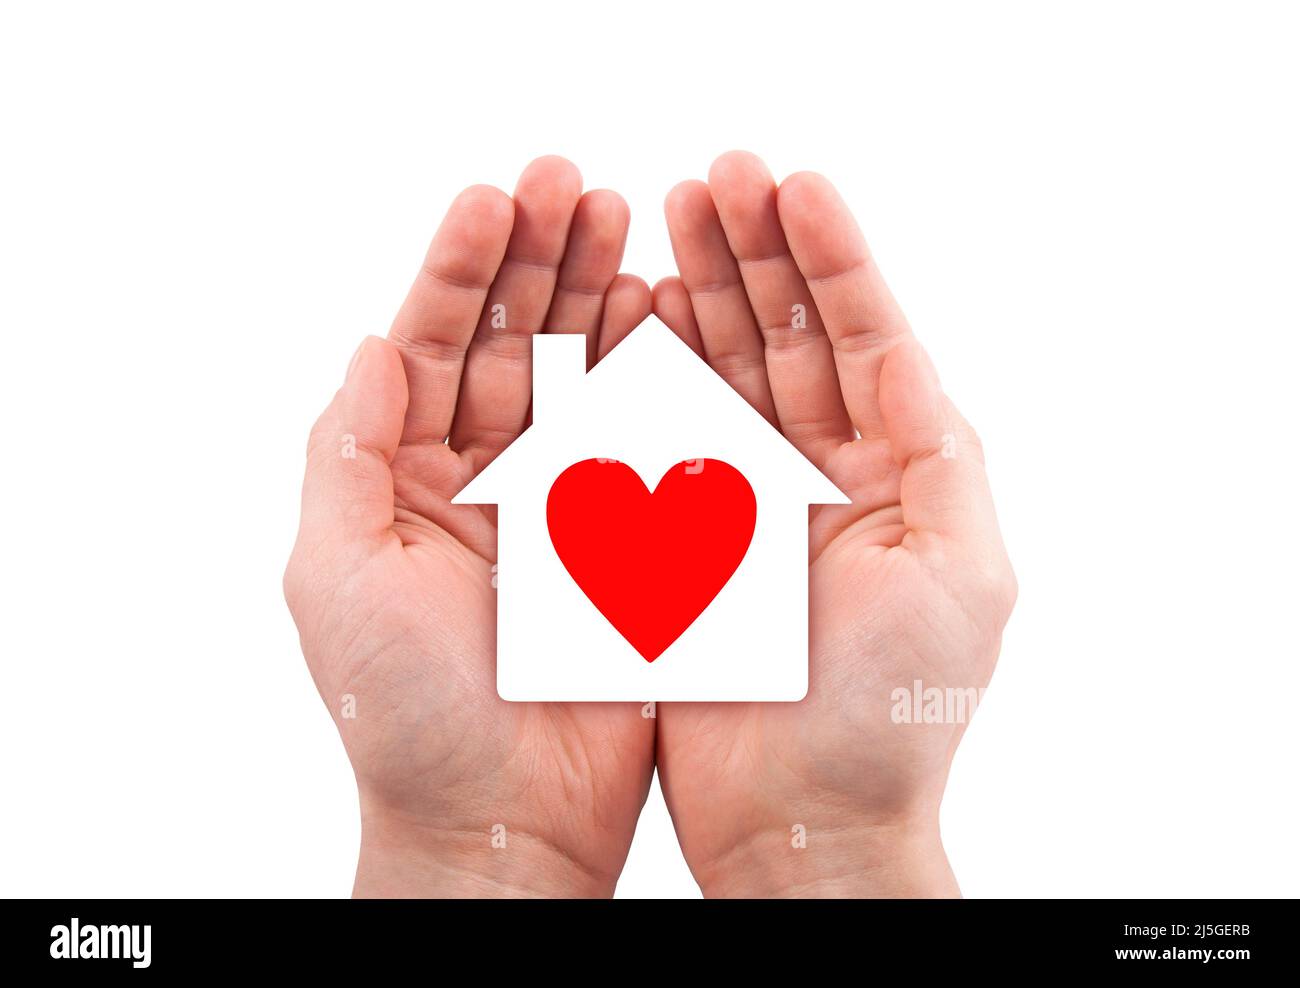 Paper house with red heart cutout in hands isolated on white background with clipping path. Stock Photo